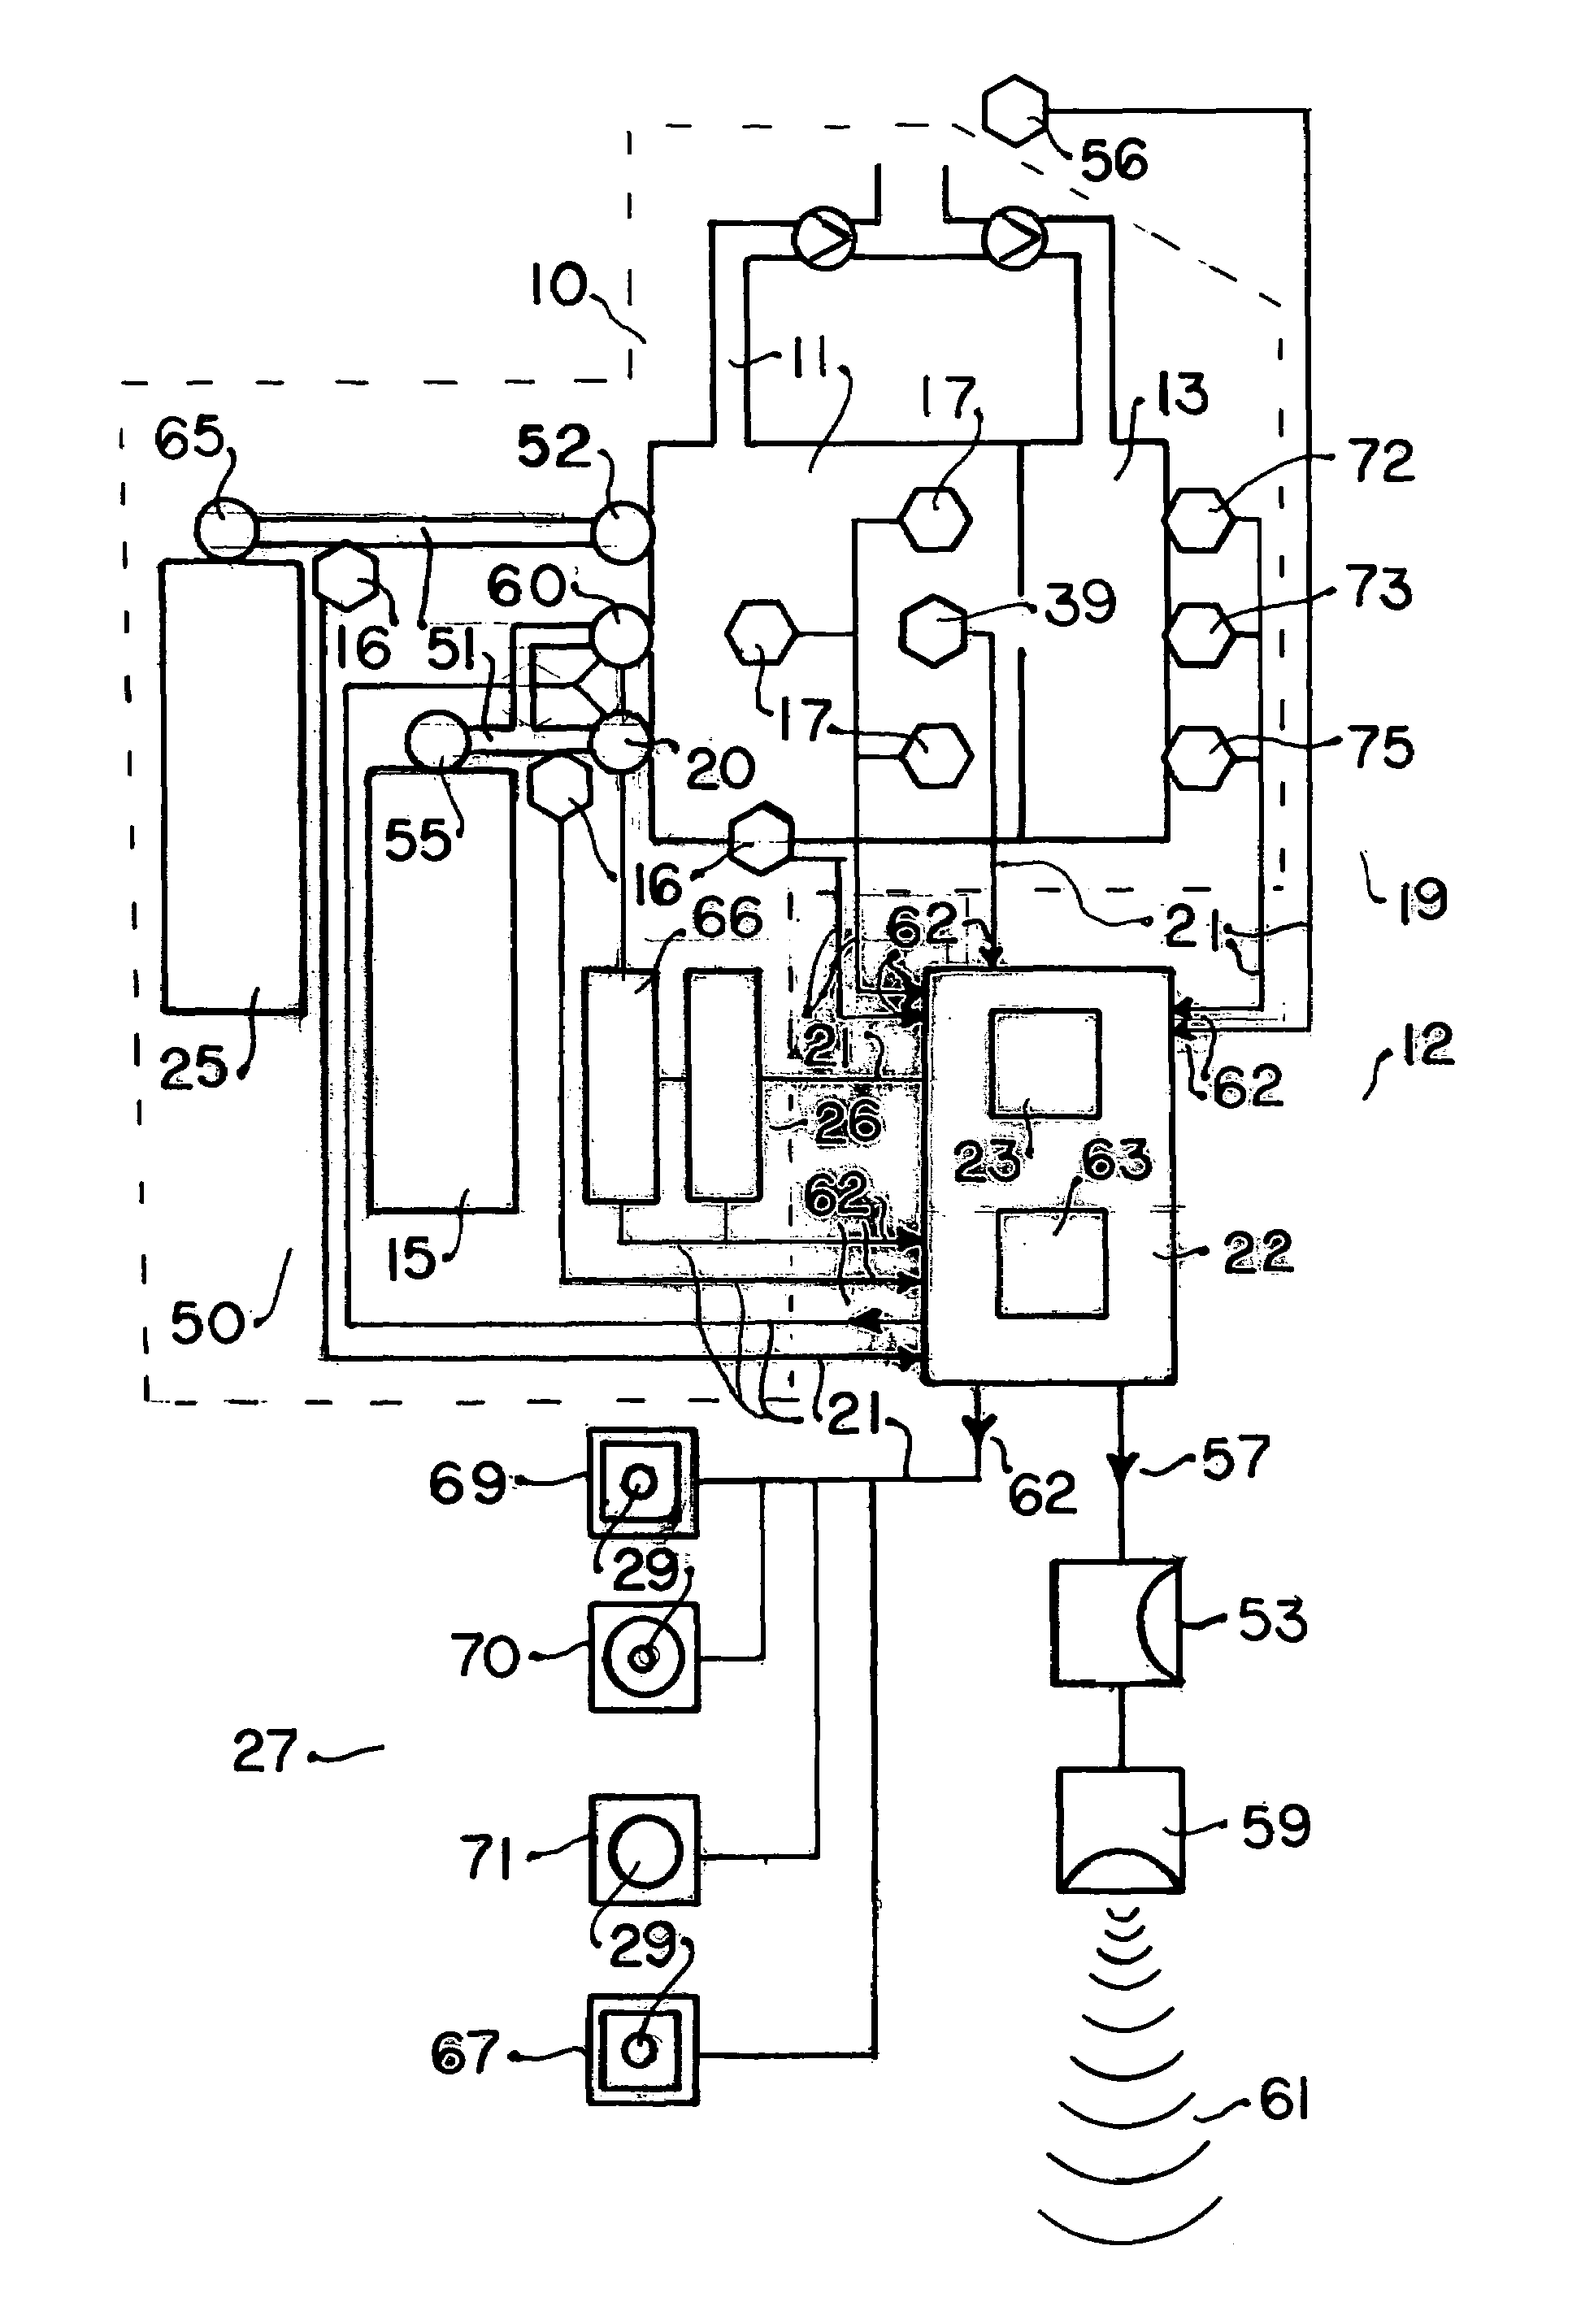 Self contained breathing apparatus control system for atmospheric use